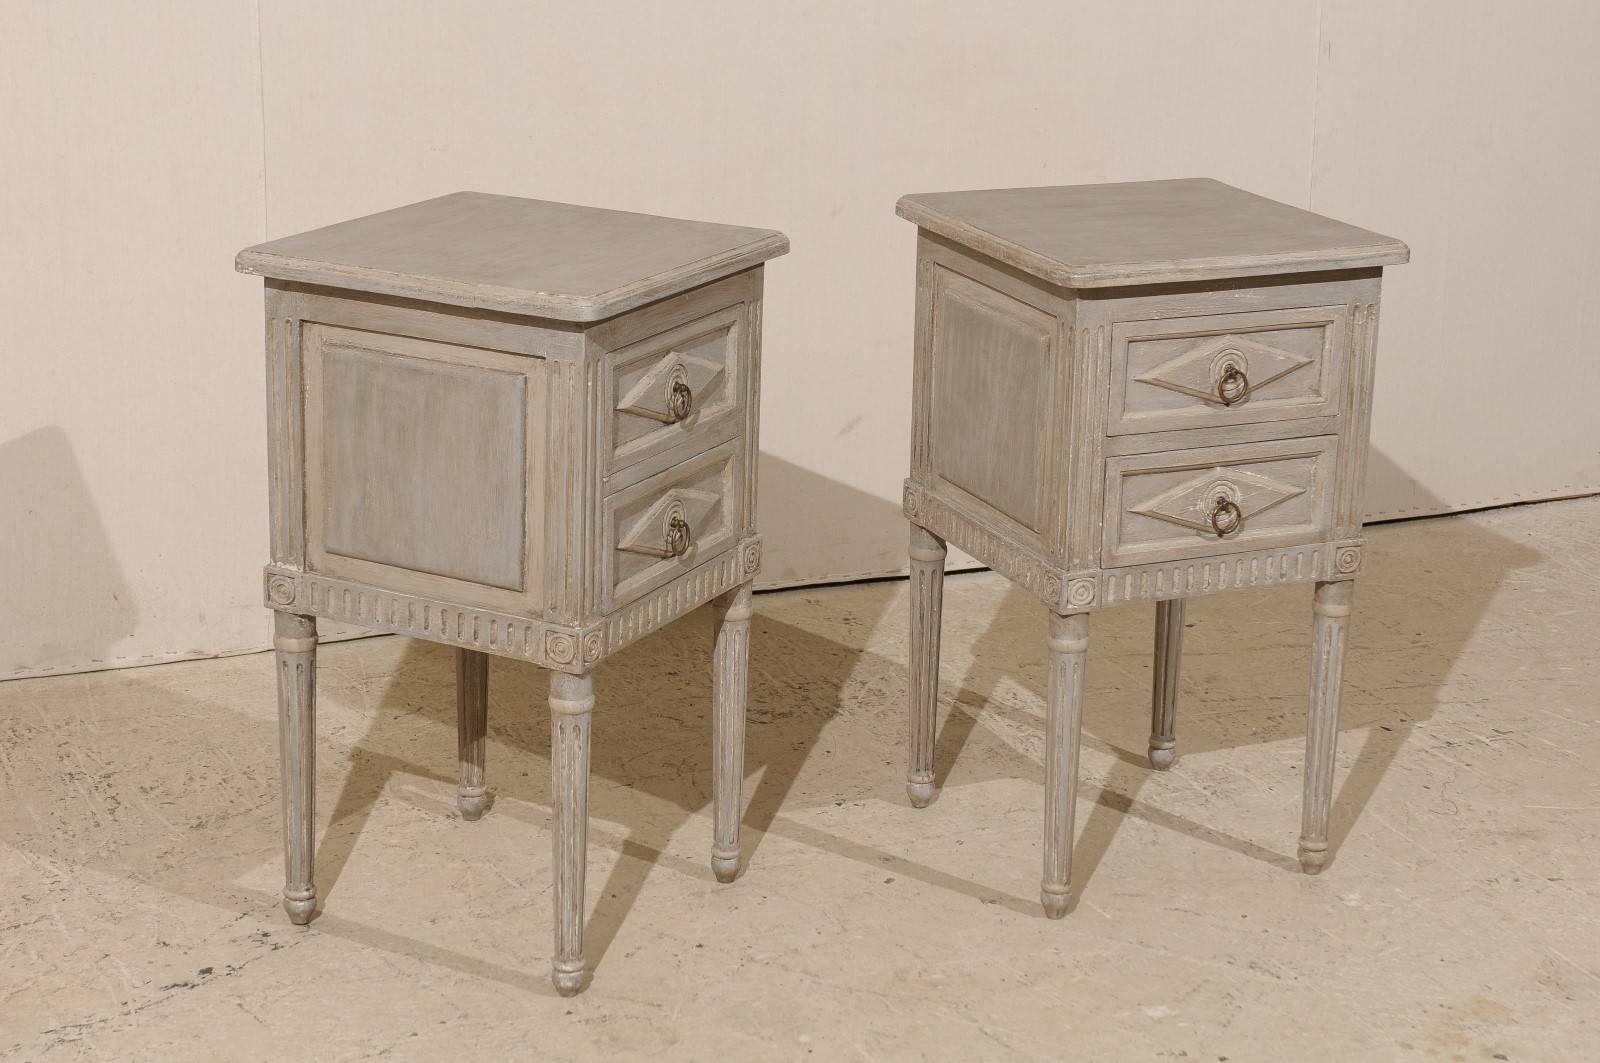 Contemporary Pair of Small Sized Two-Drawer Painted Wood Nightstand Tables in Neutral Grey